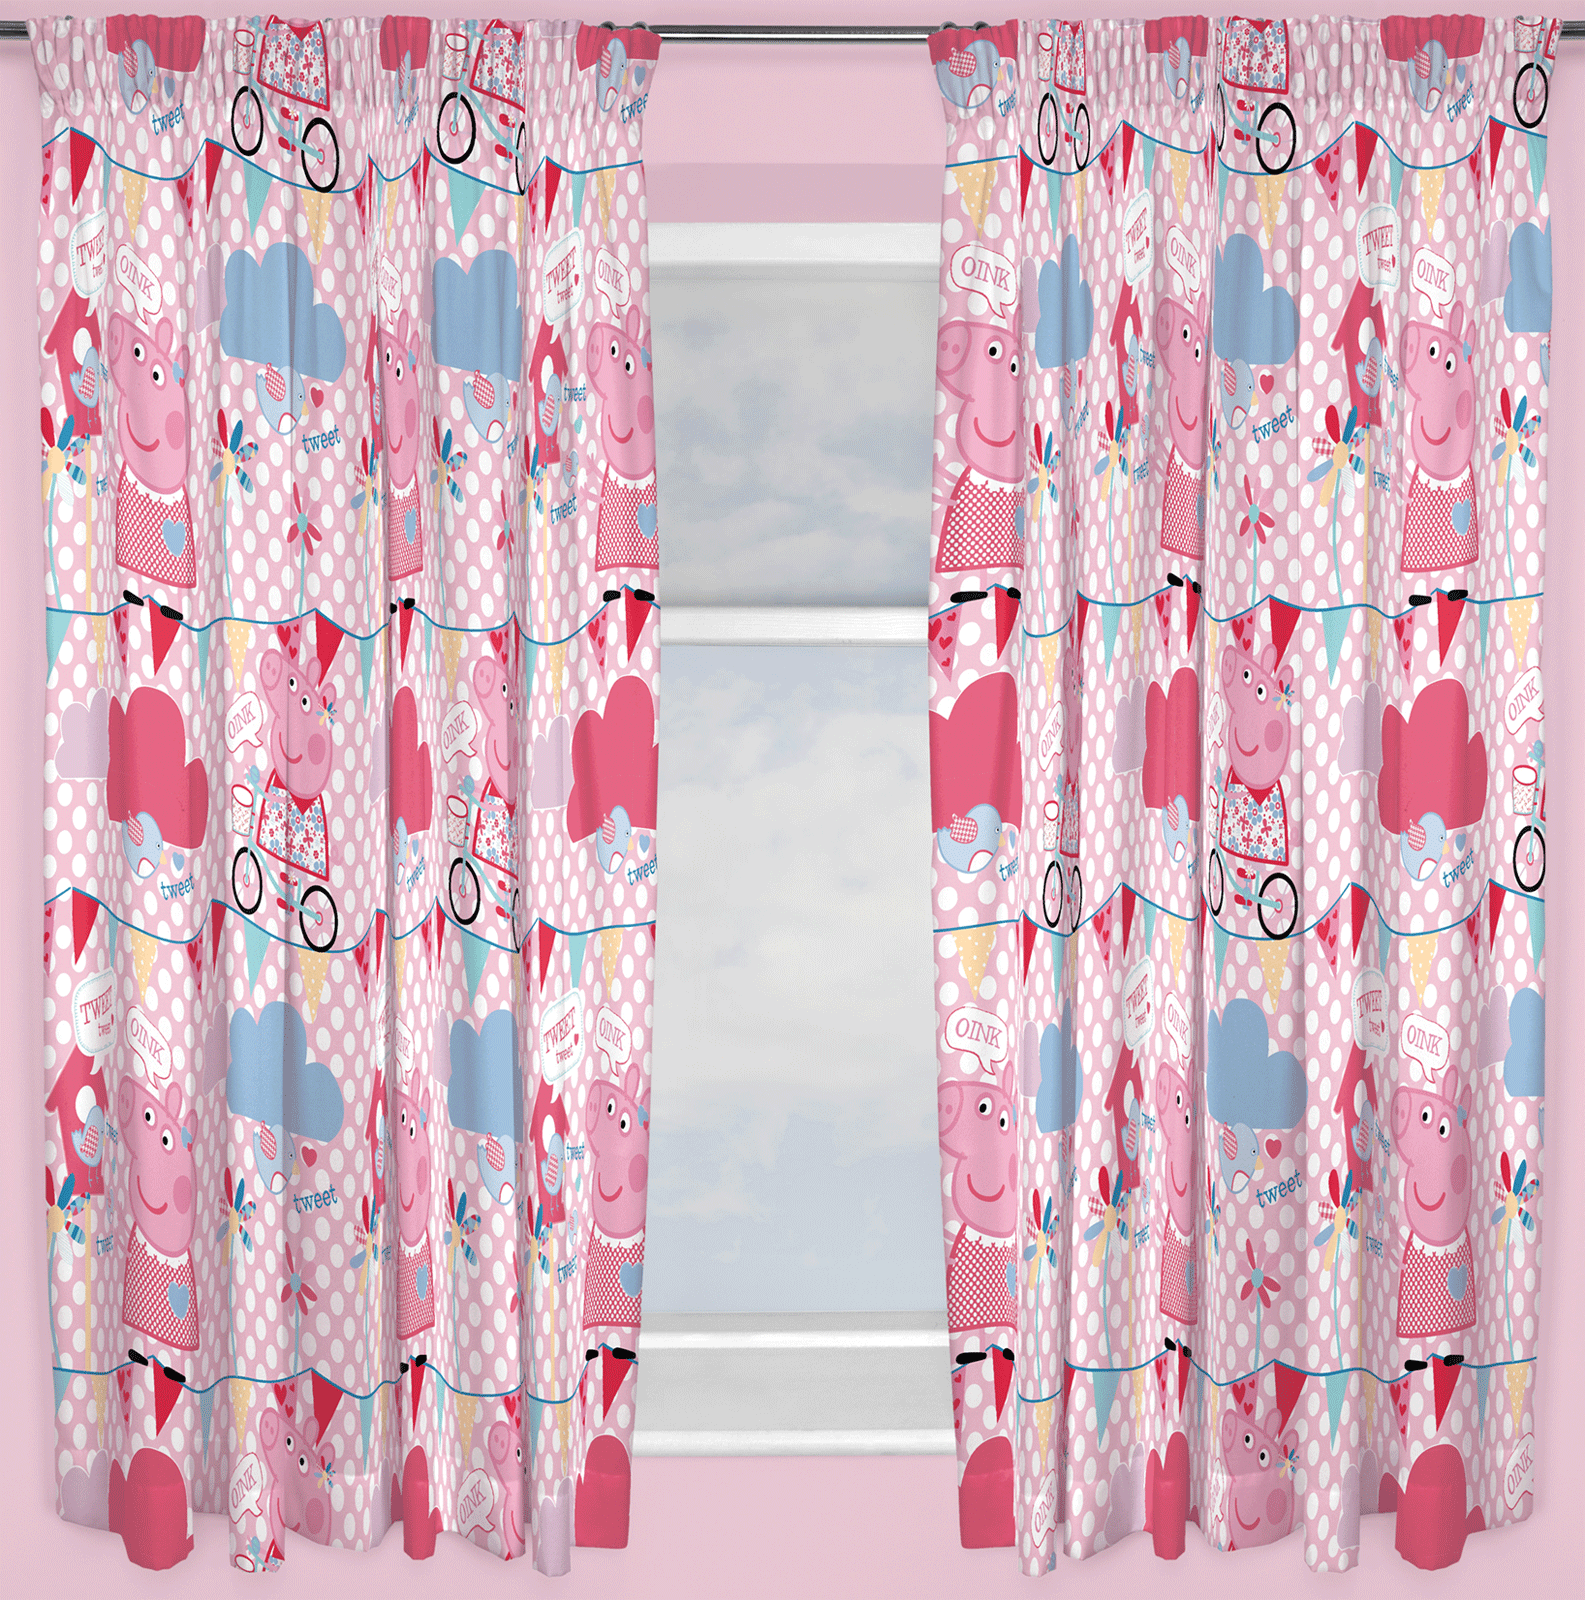 PEPPA PIG TWEET CURTAINS 66" x 72" INCH DROP READY MADE GIRLS CHARACTER